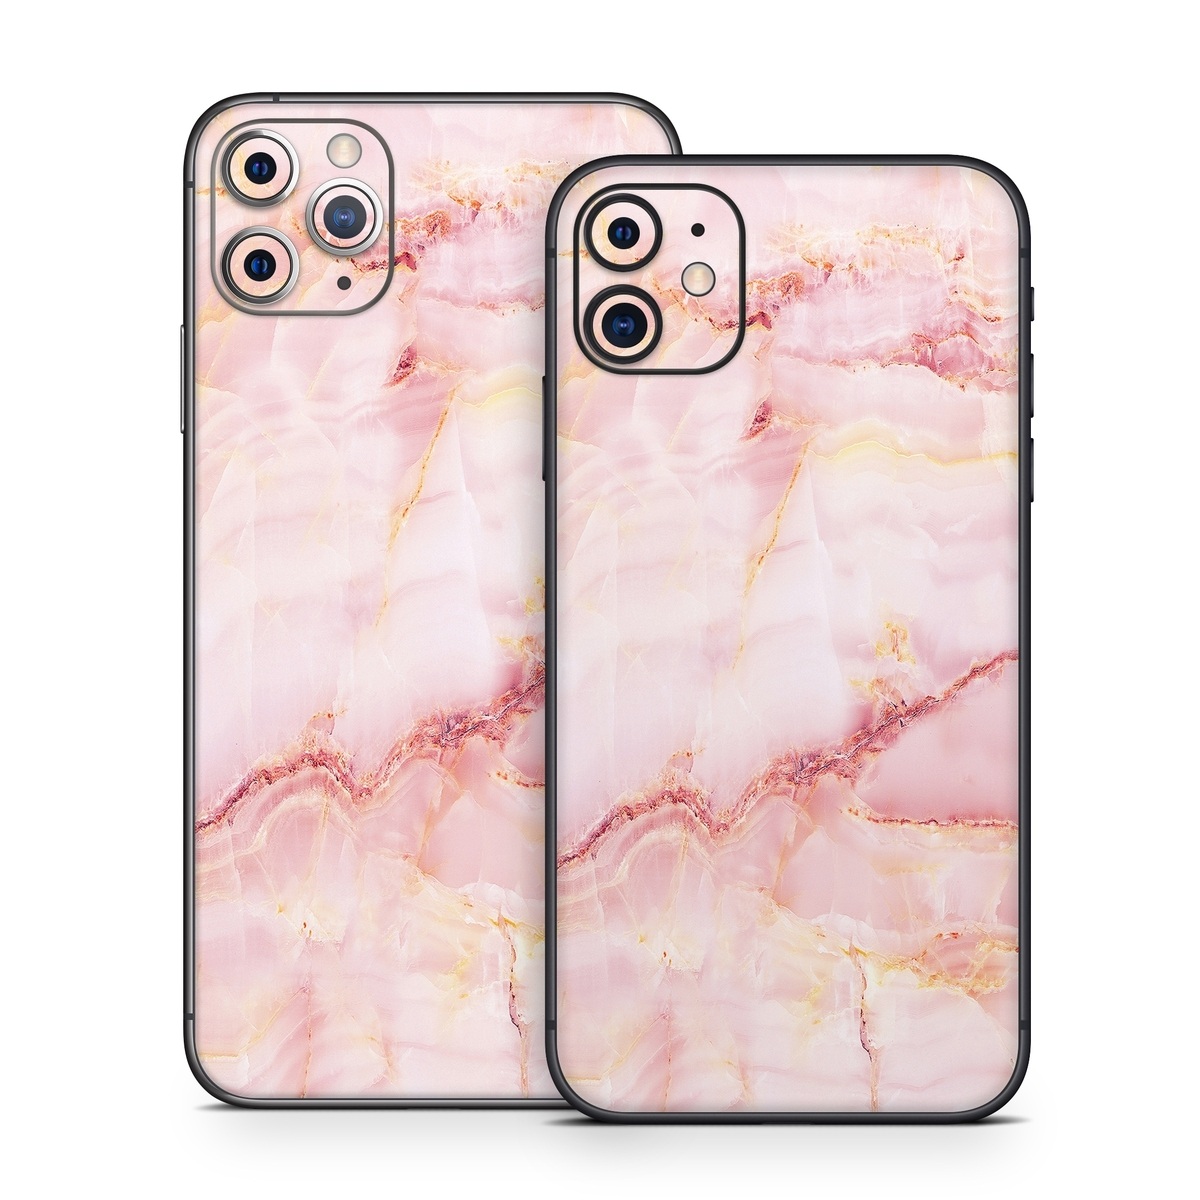 iPhone 11 Skin design of Pink, Peach, with white, pink, red, yellow, orange colors